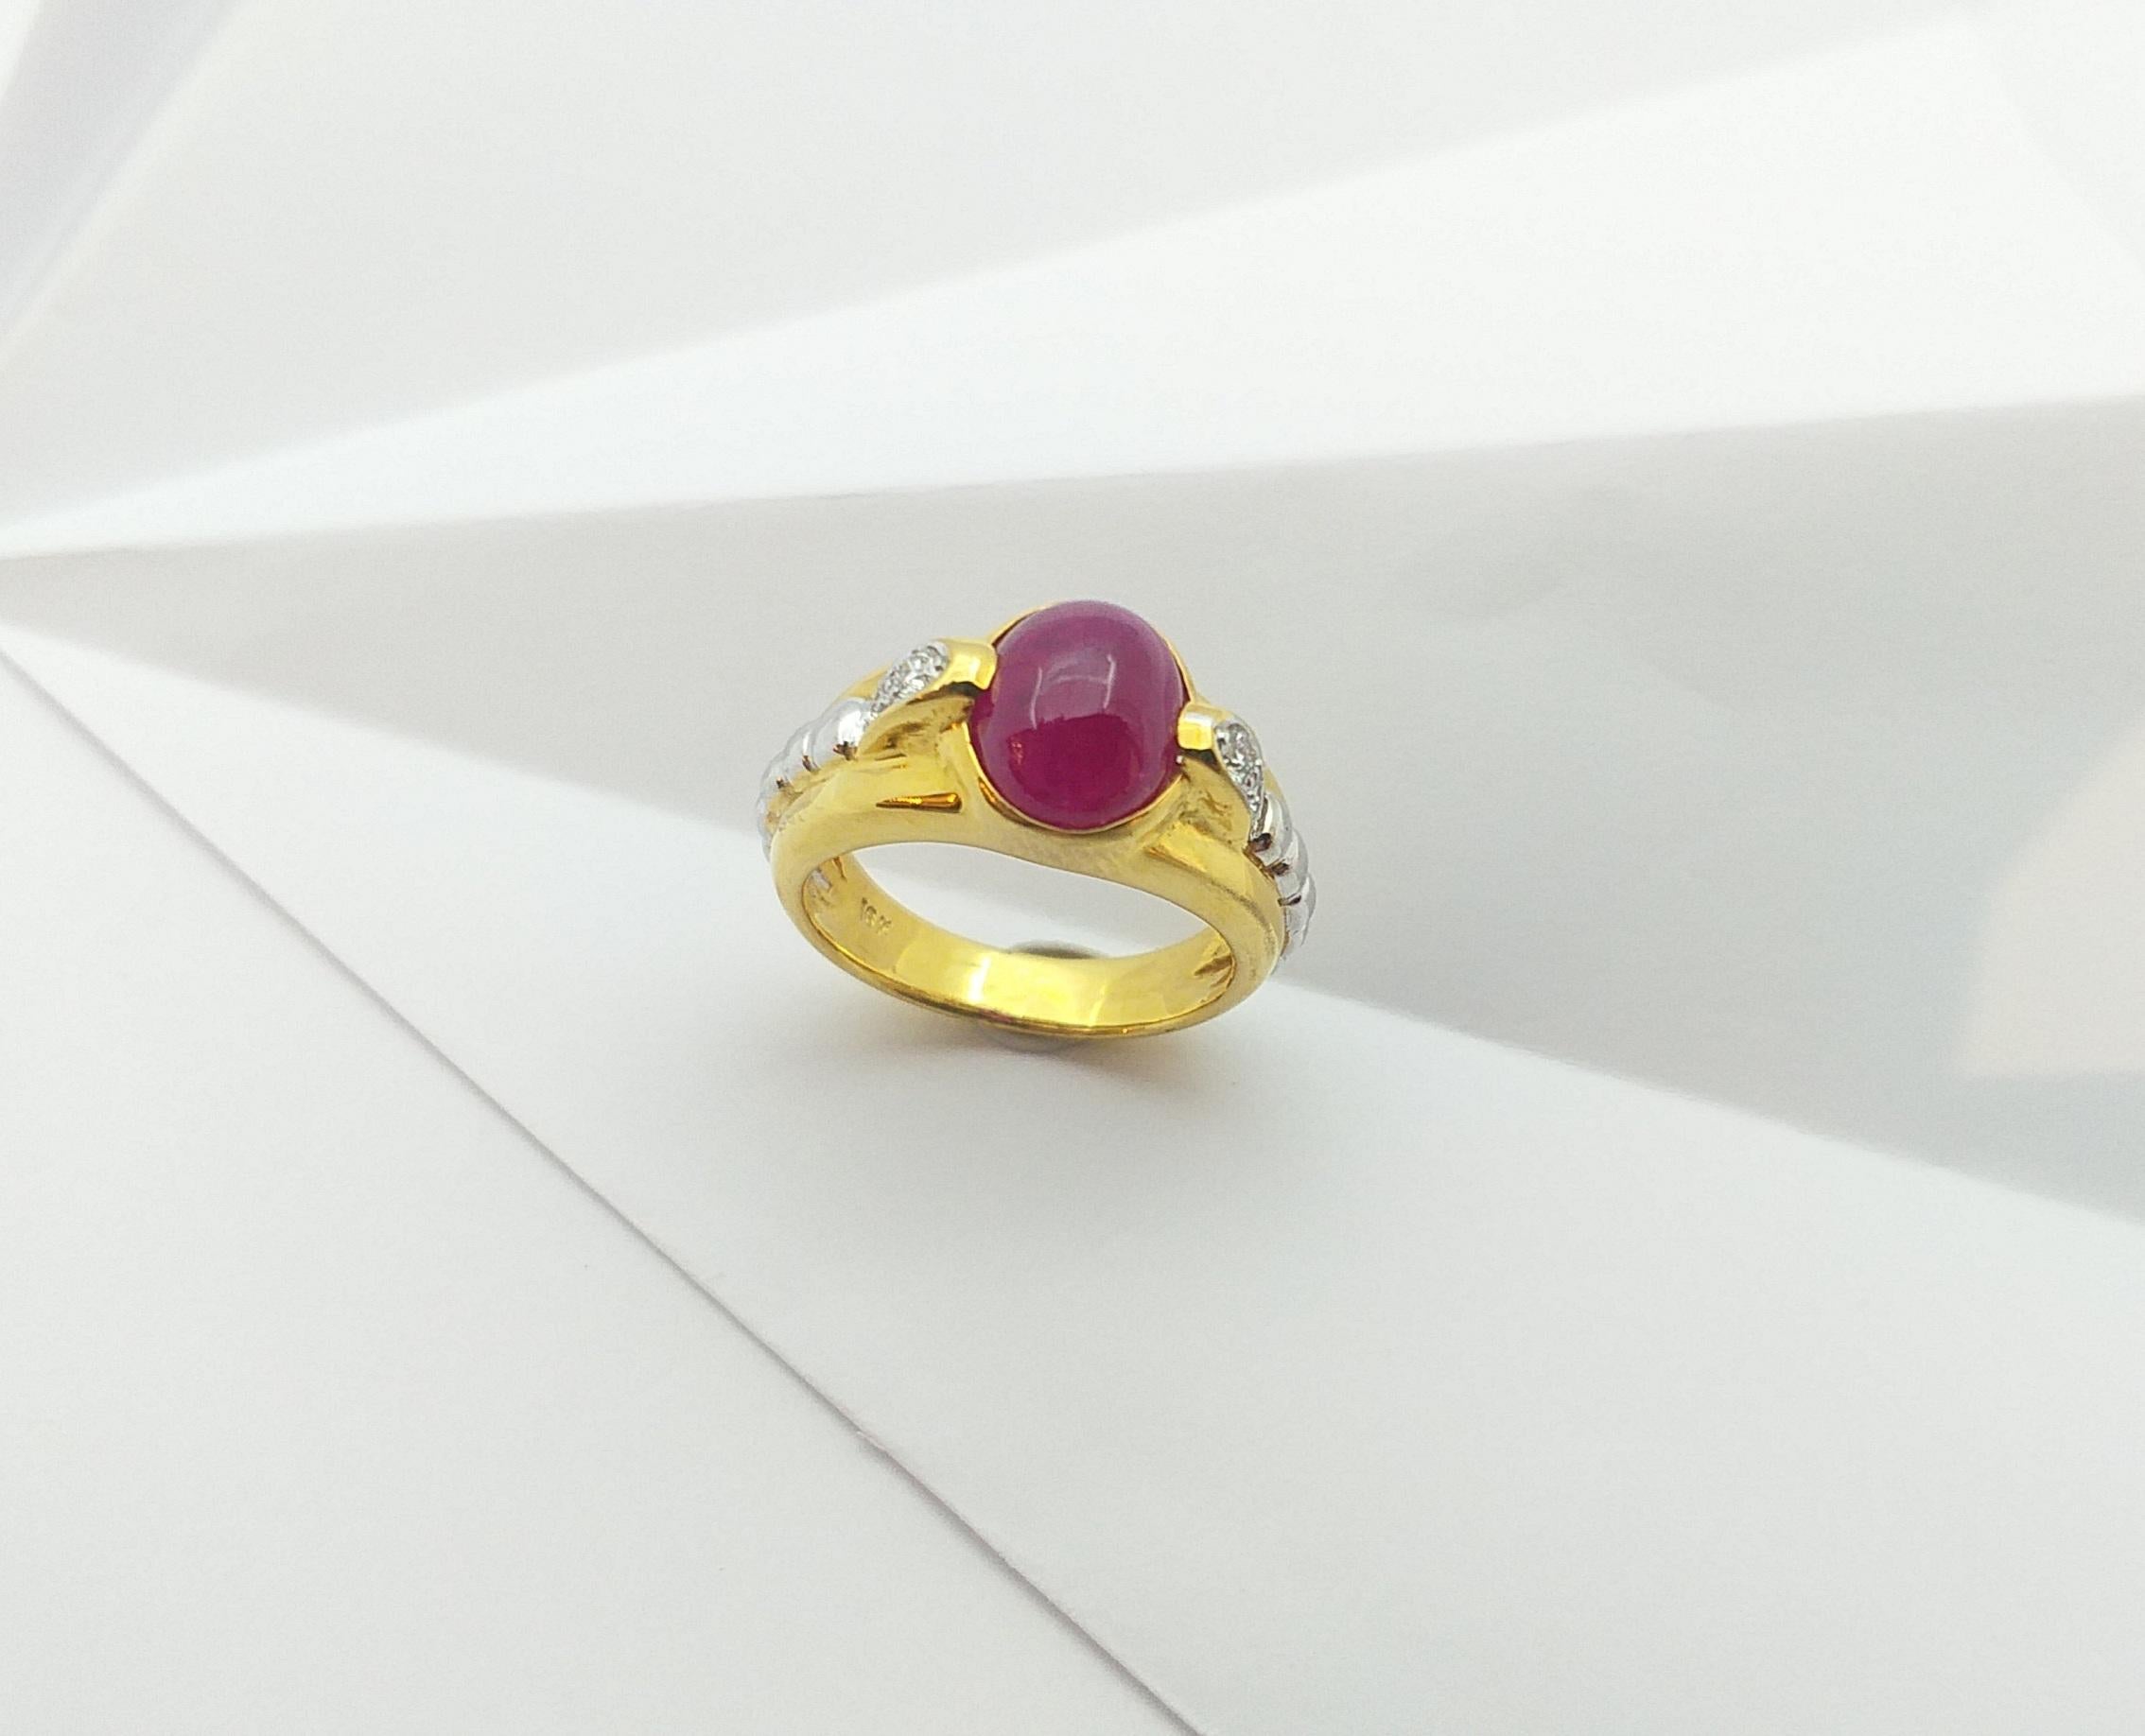 Cabochon Ruby with Diamond Ring Set in 18 Karat Gold Settings For Sale 6